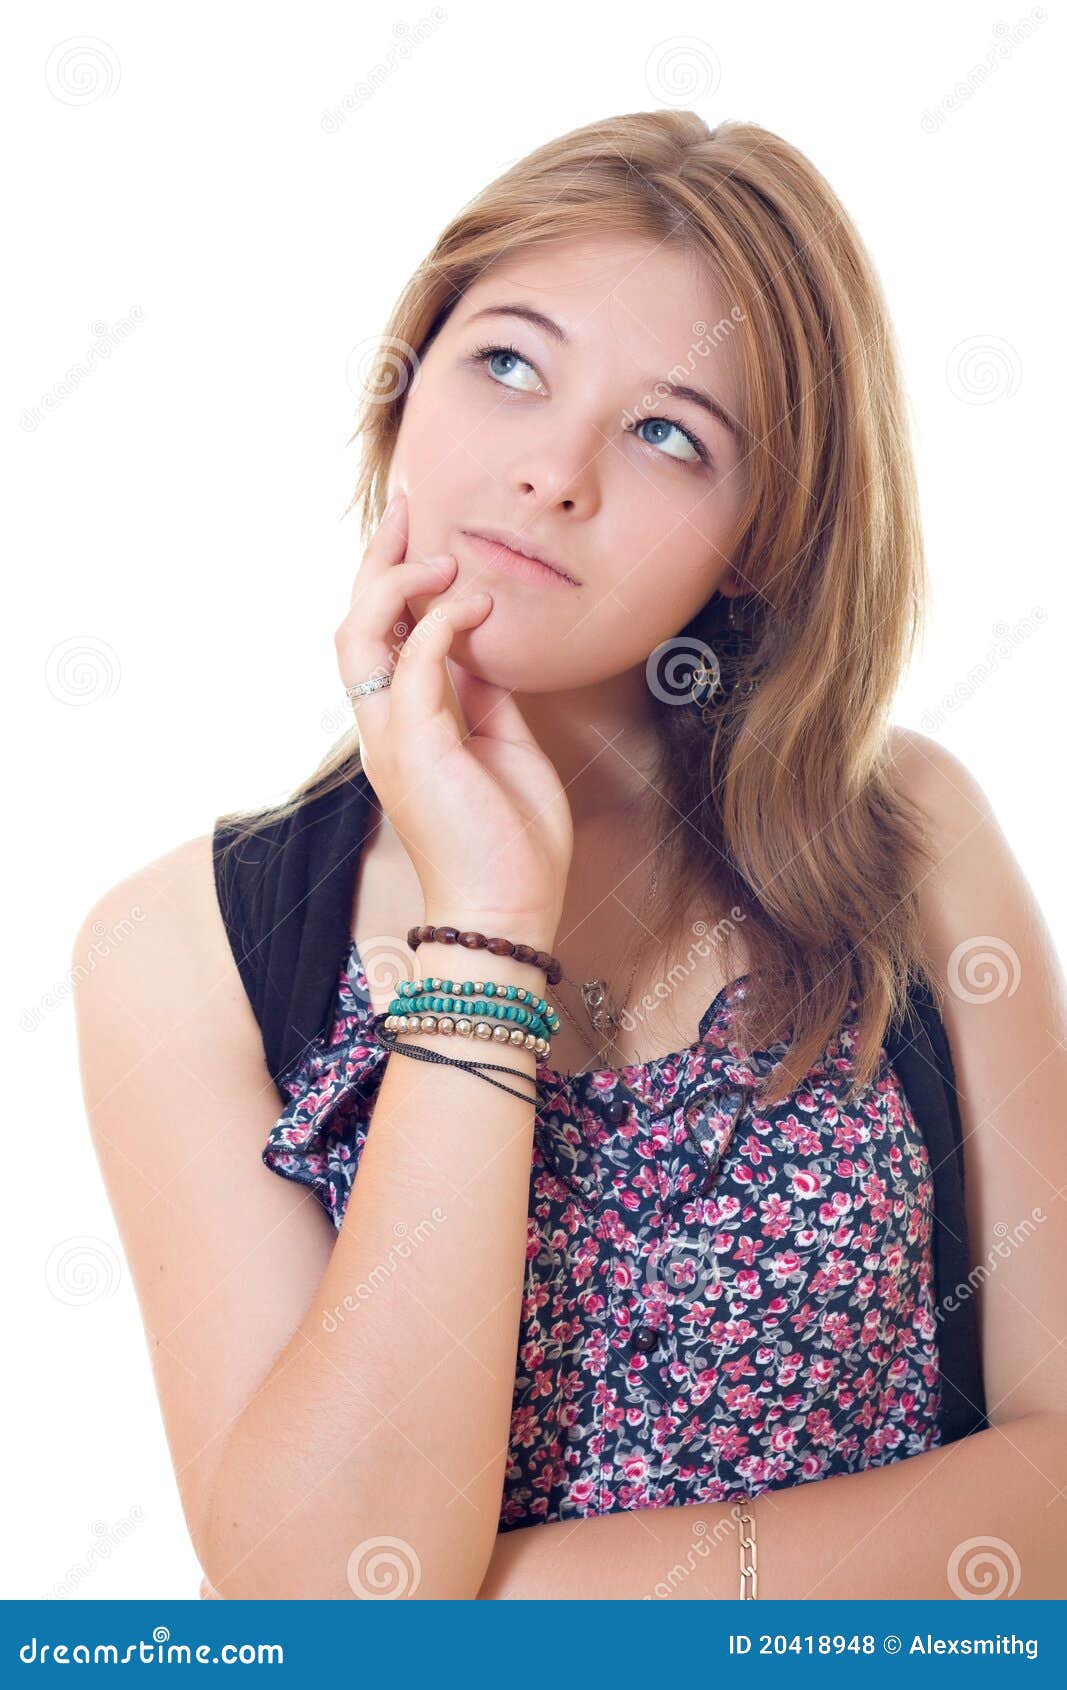 Teenager Girl Looking Up Royalty Free Stock Photos - Image: 20418948